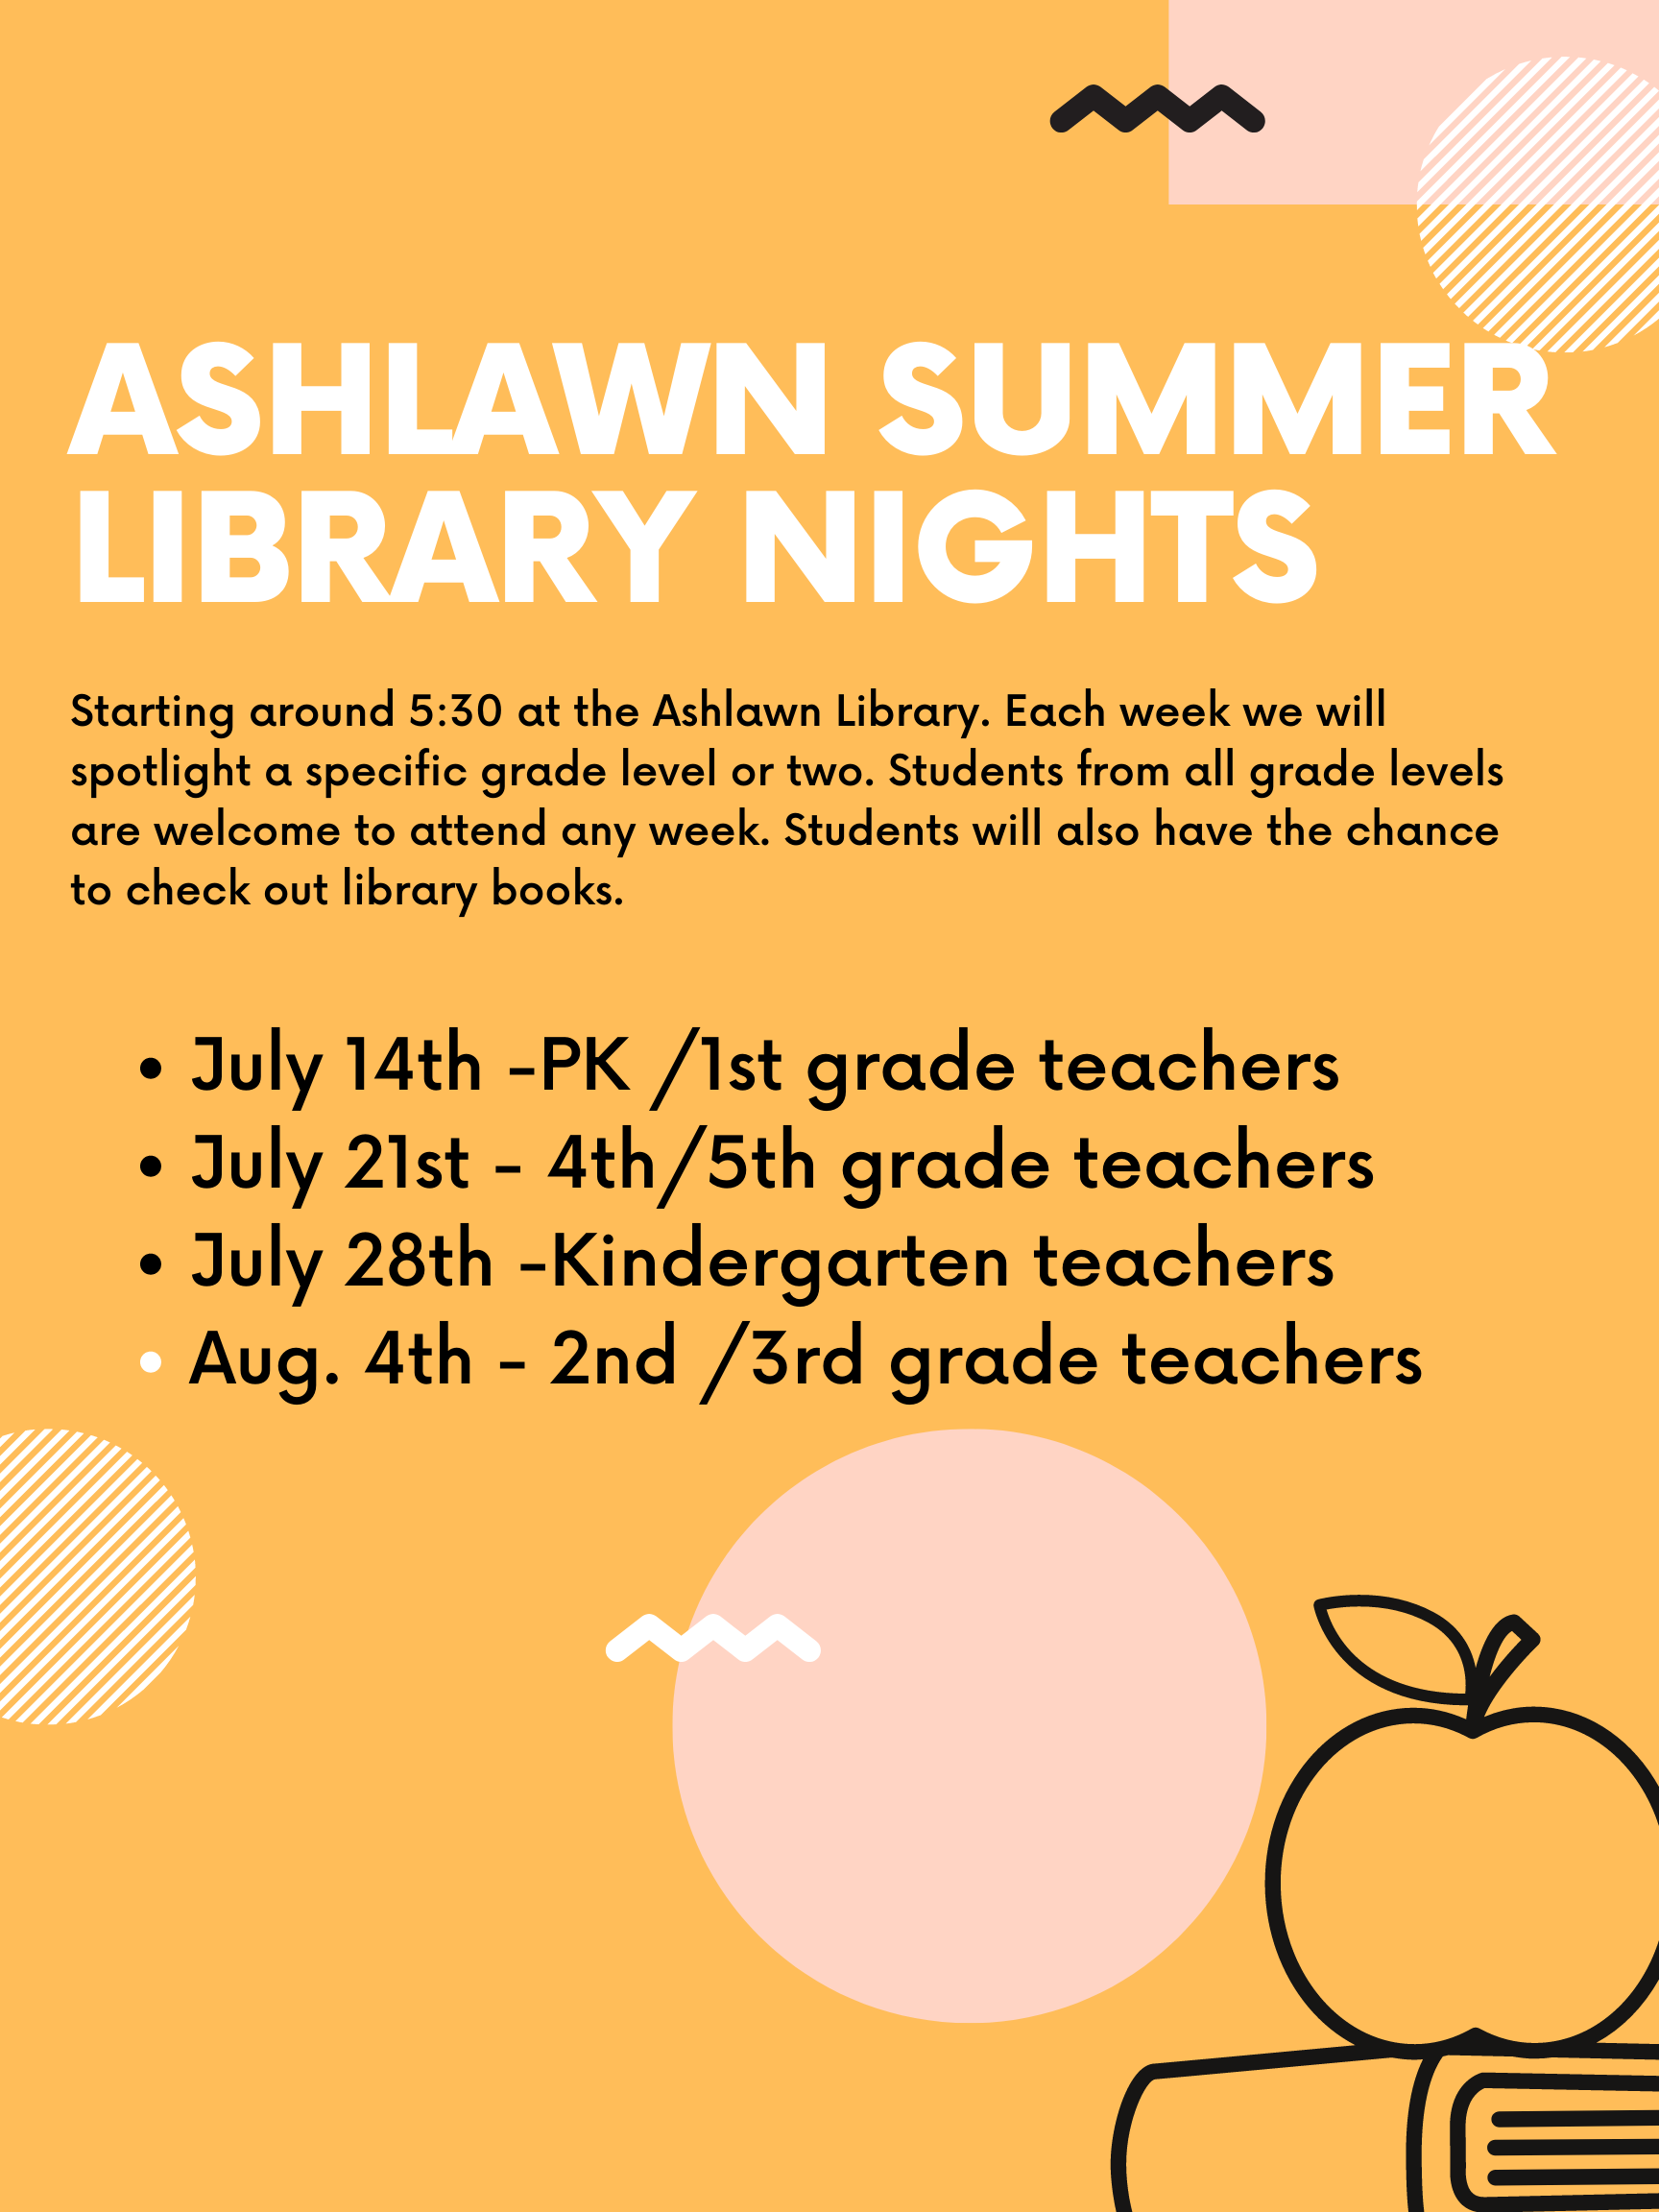 apple and book image Ashlawn Summer Library nights